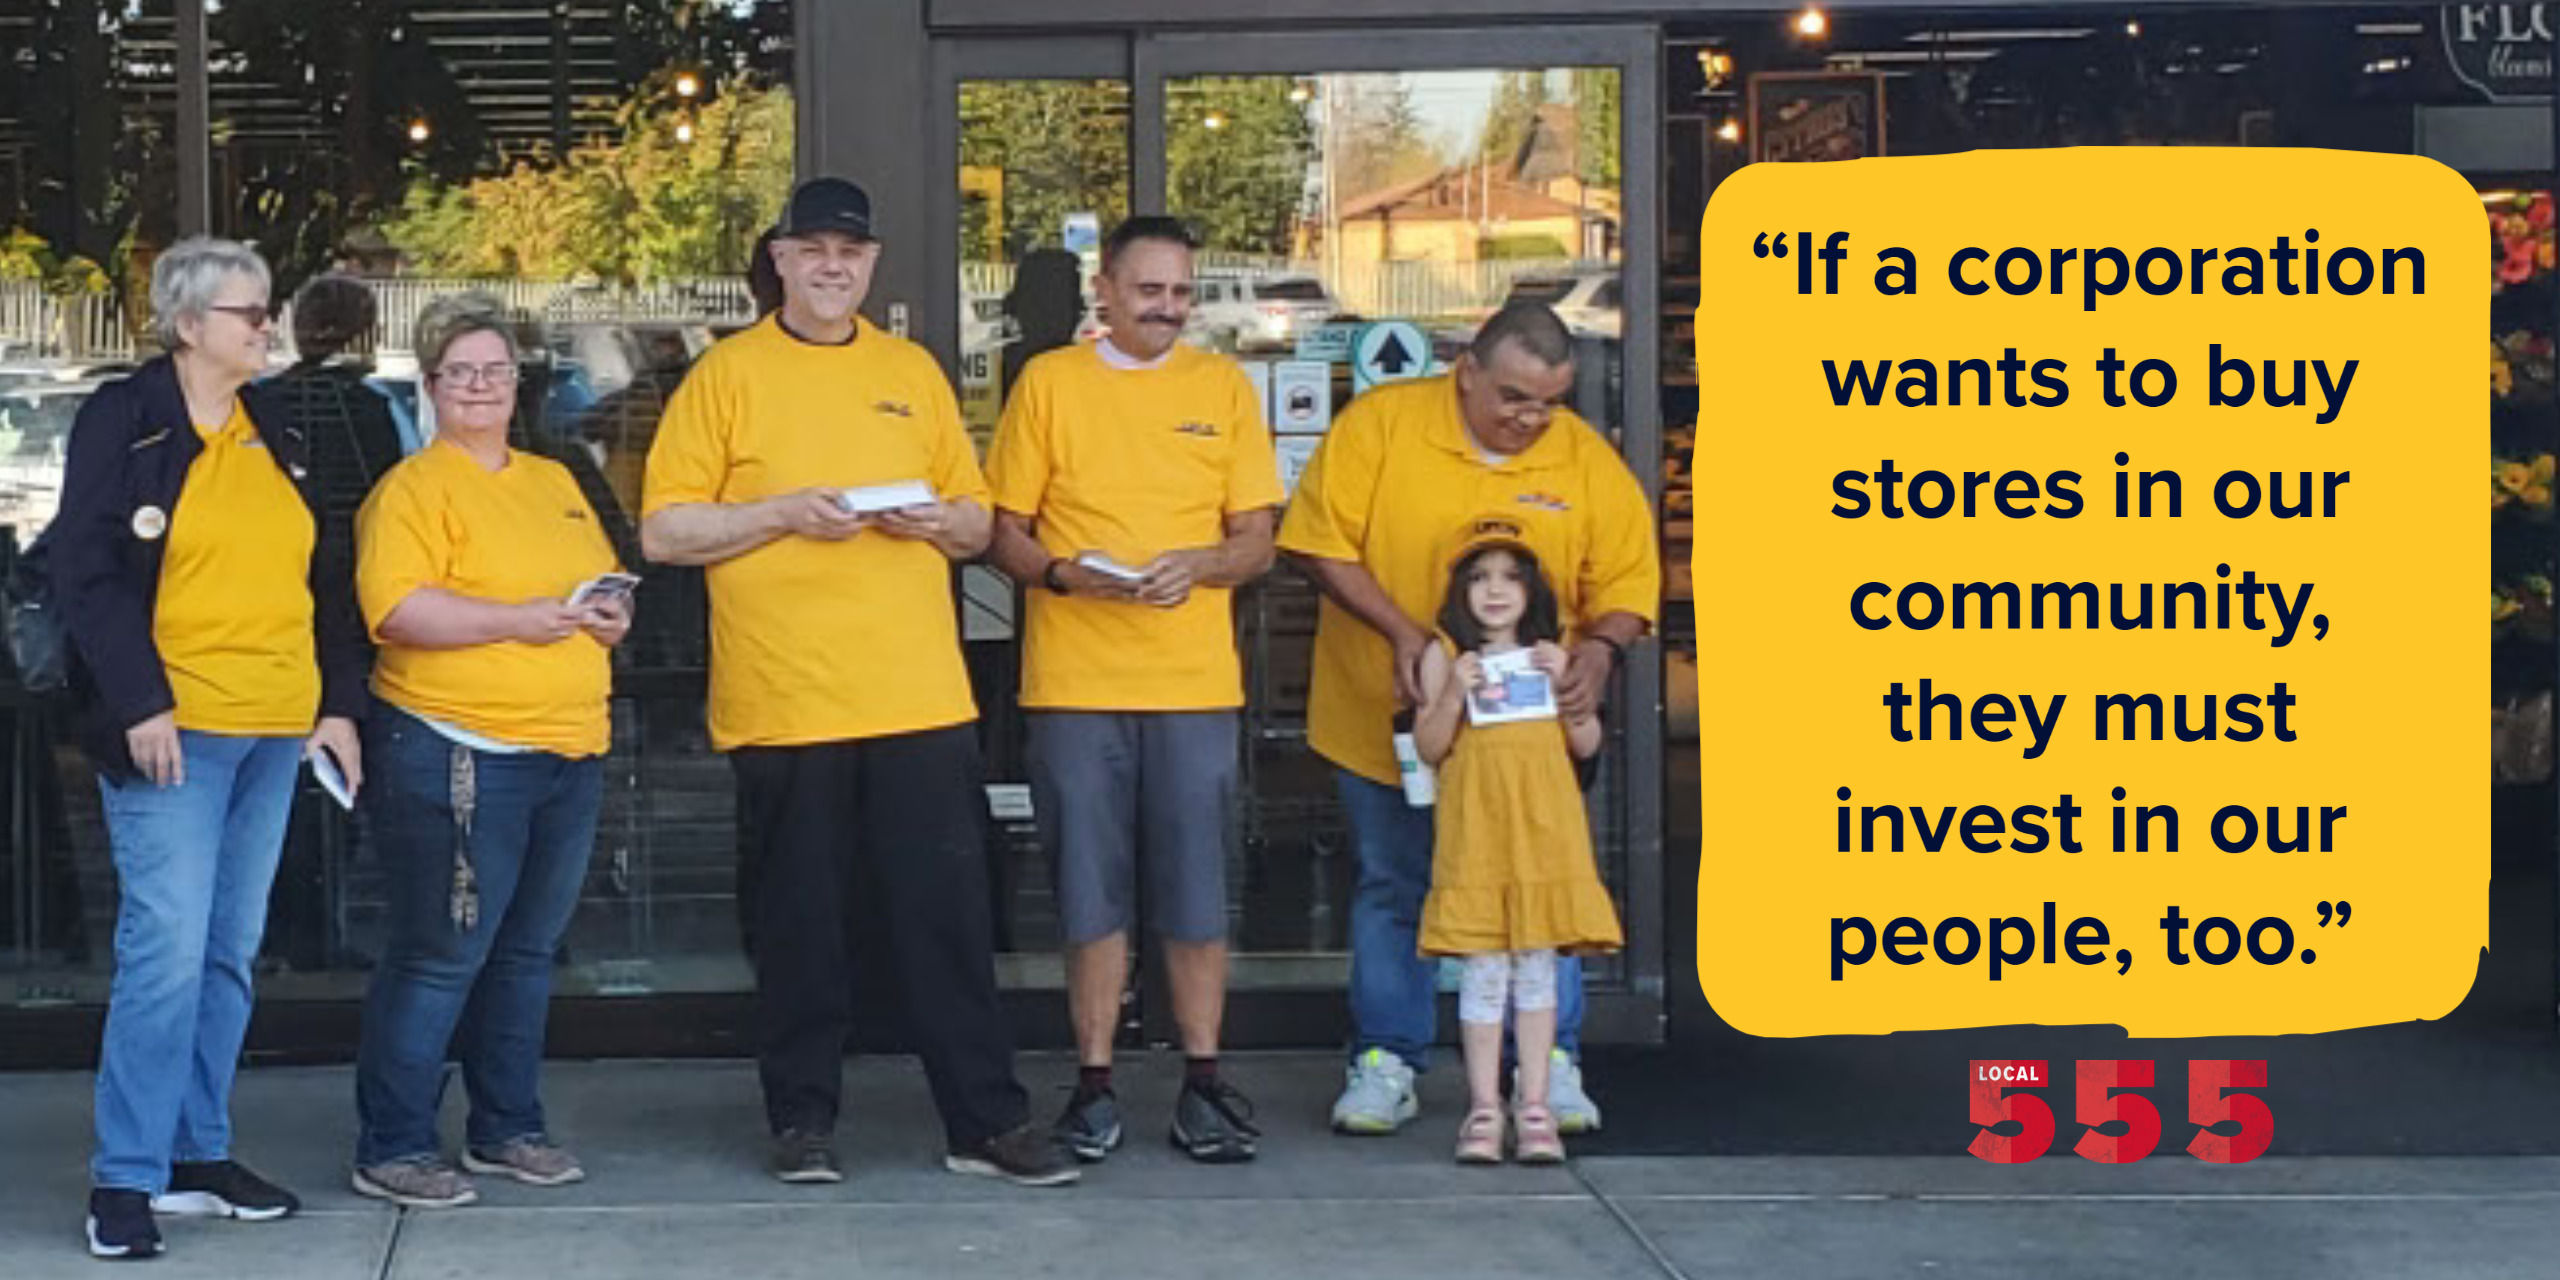 A group of 5 adults and 1 child stand in front of a Roth's Grocery store in Gold Teeshirts, a quote to the right says, "If a corporation wants to buy stores in our community, they must invest in our people, too."